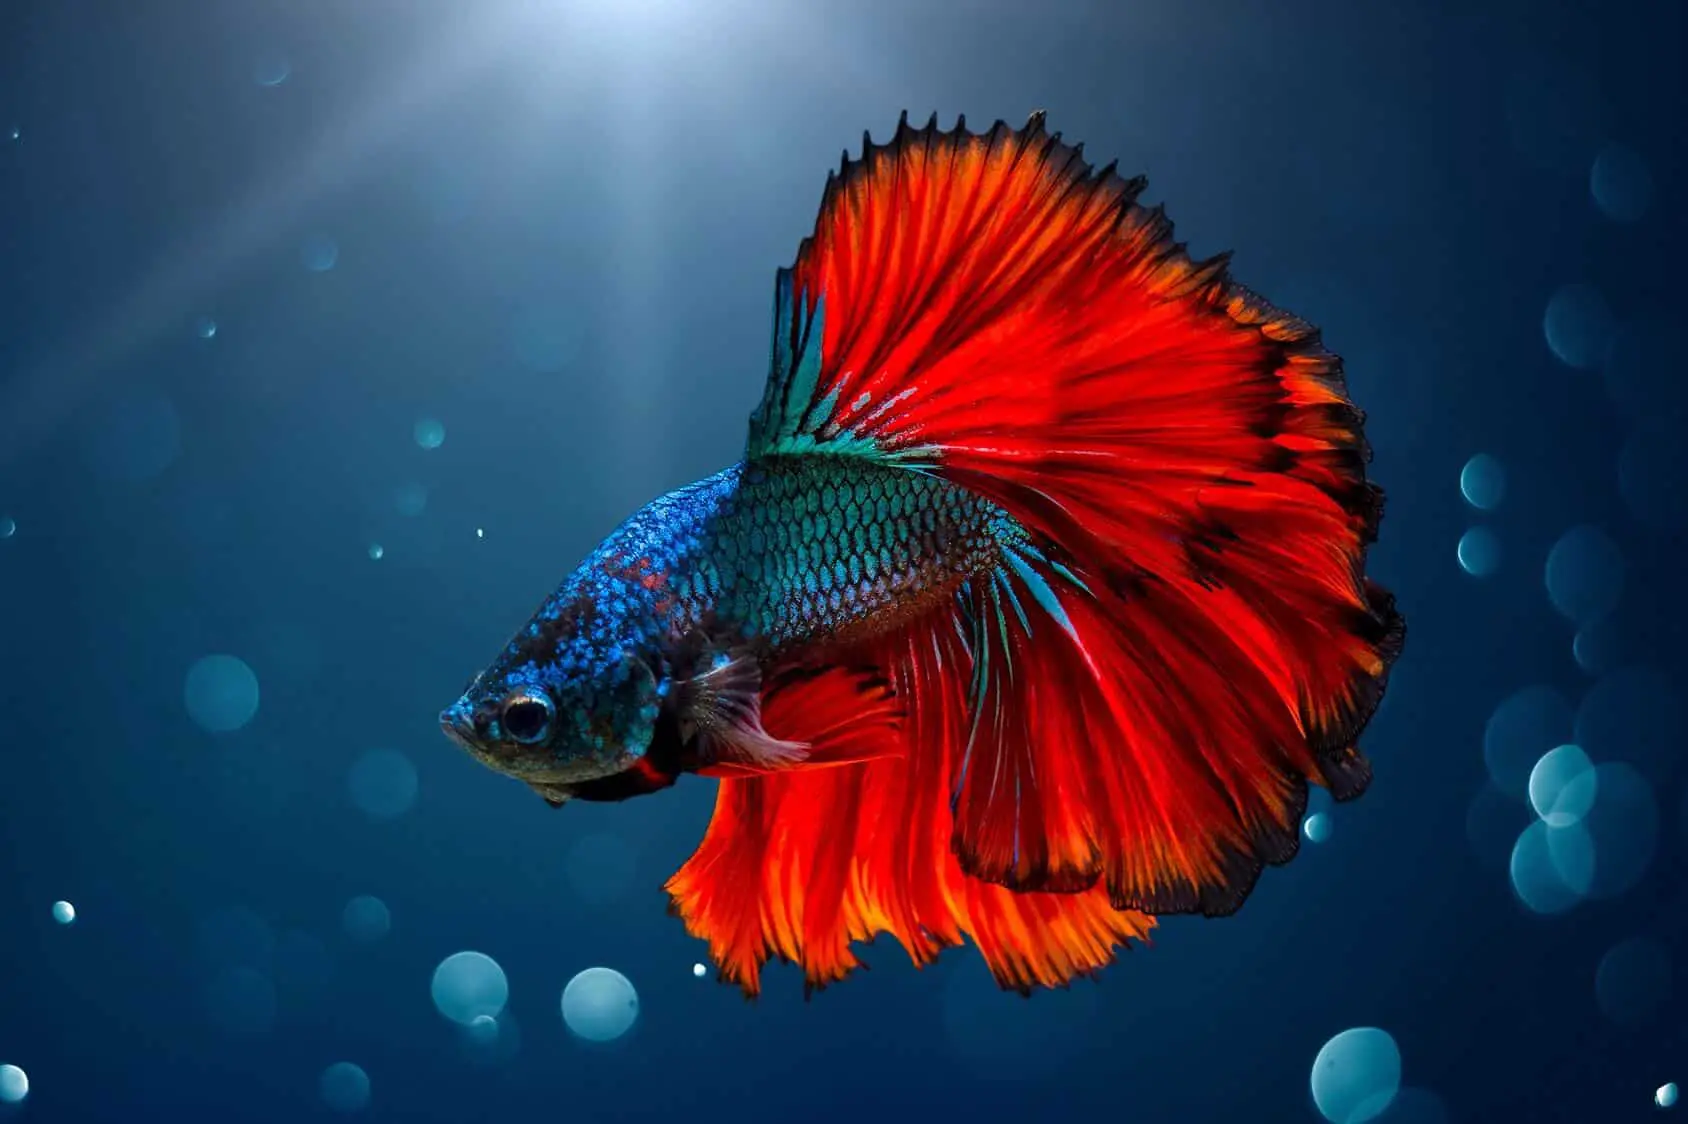 The Top 10 Most Badass Names for Male Betta Fish 2